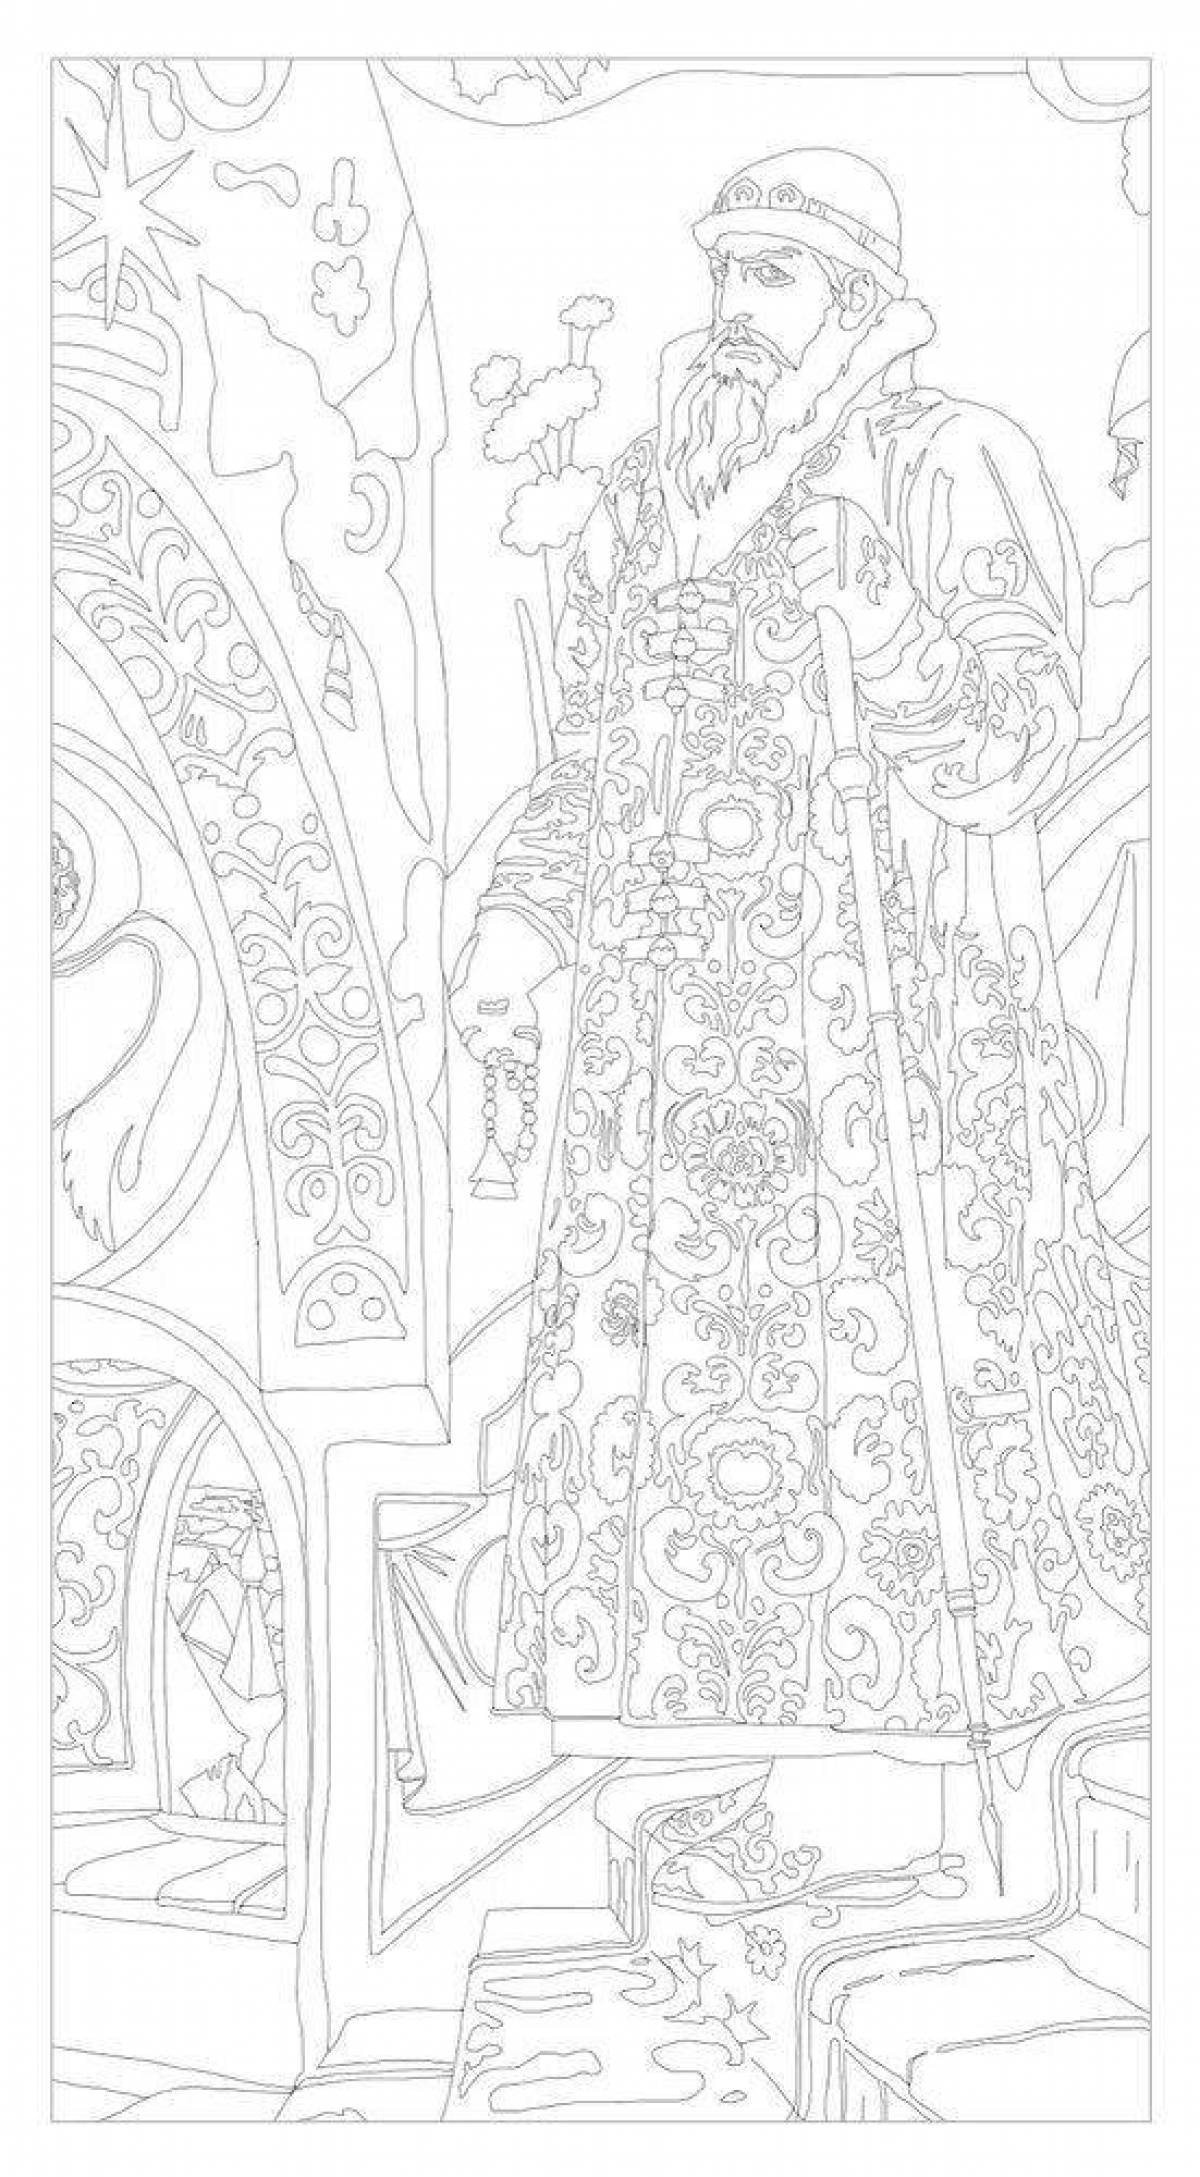 Amazing coloring book based on paintings by Vasnetsov